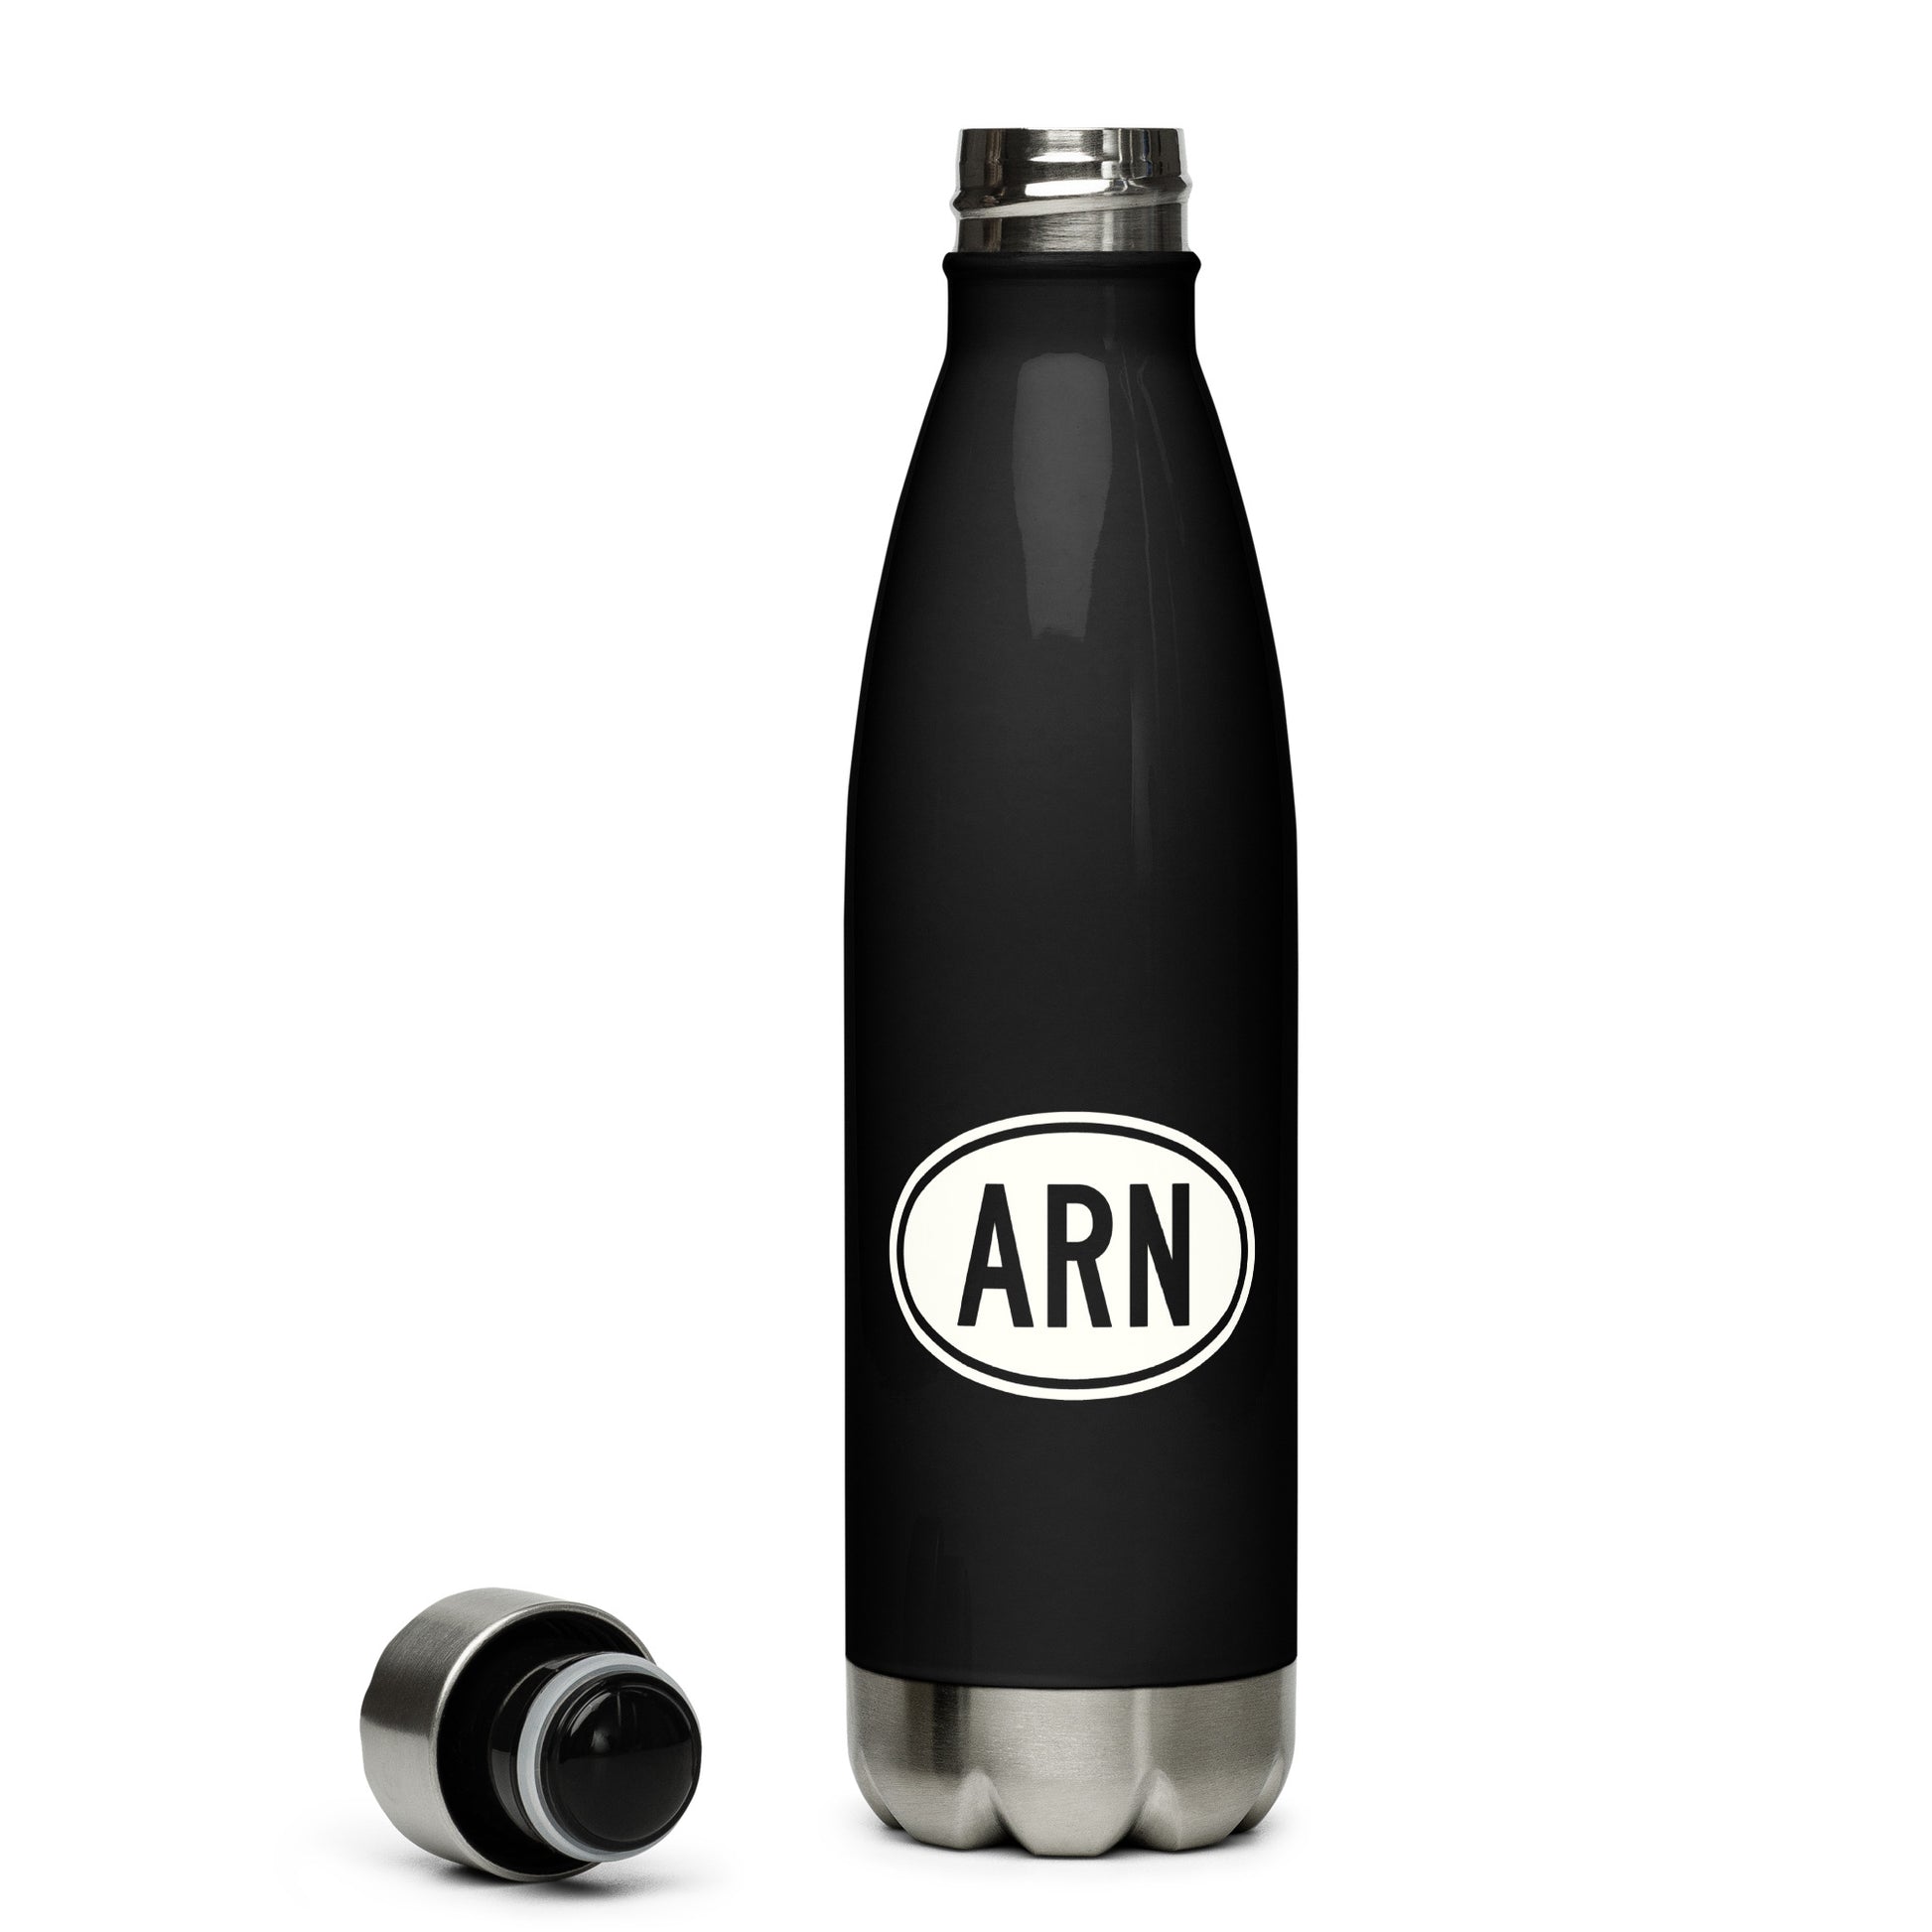 Unique Travel Gift Water Bottle - White Oval • ARN Stockholm • YHM Designs - Image 04